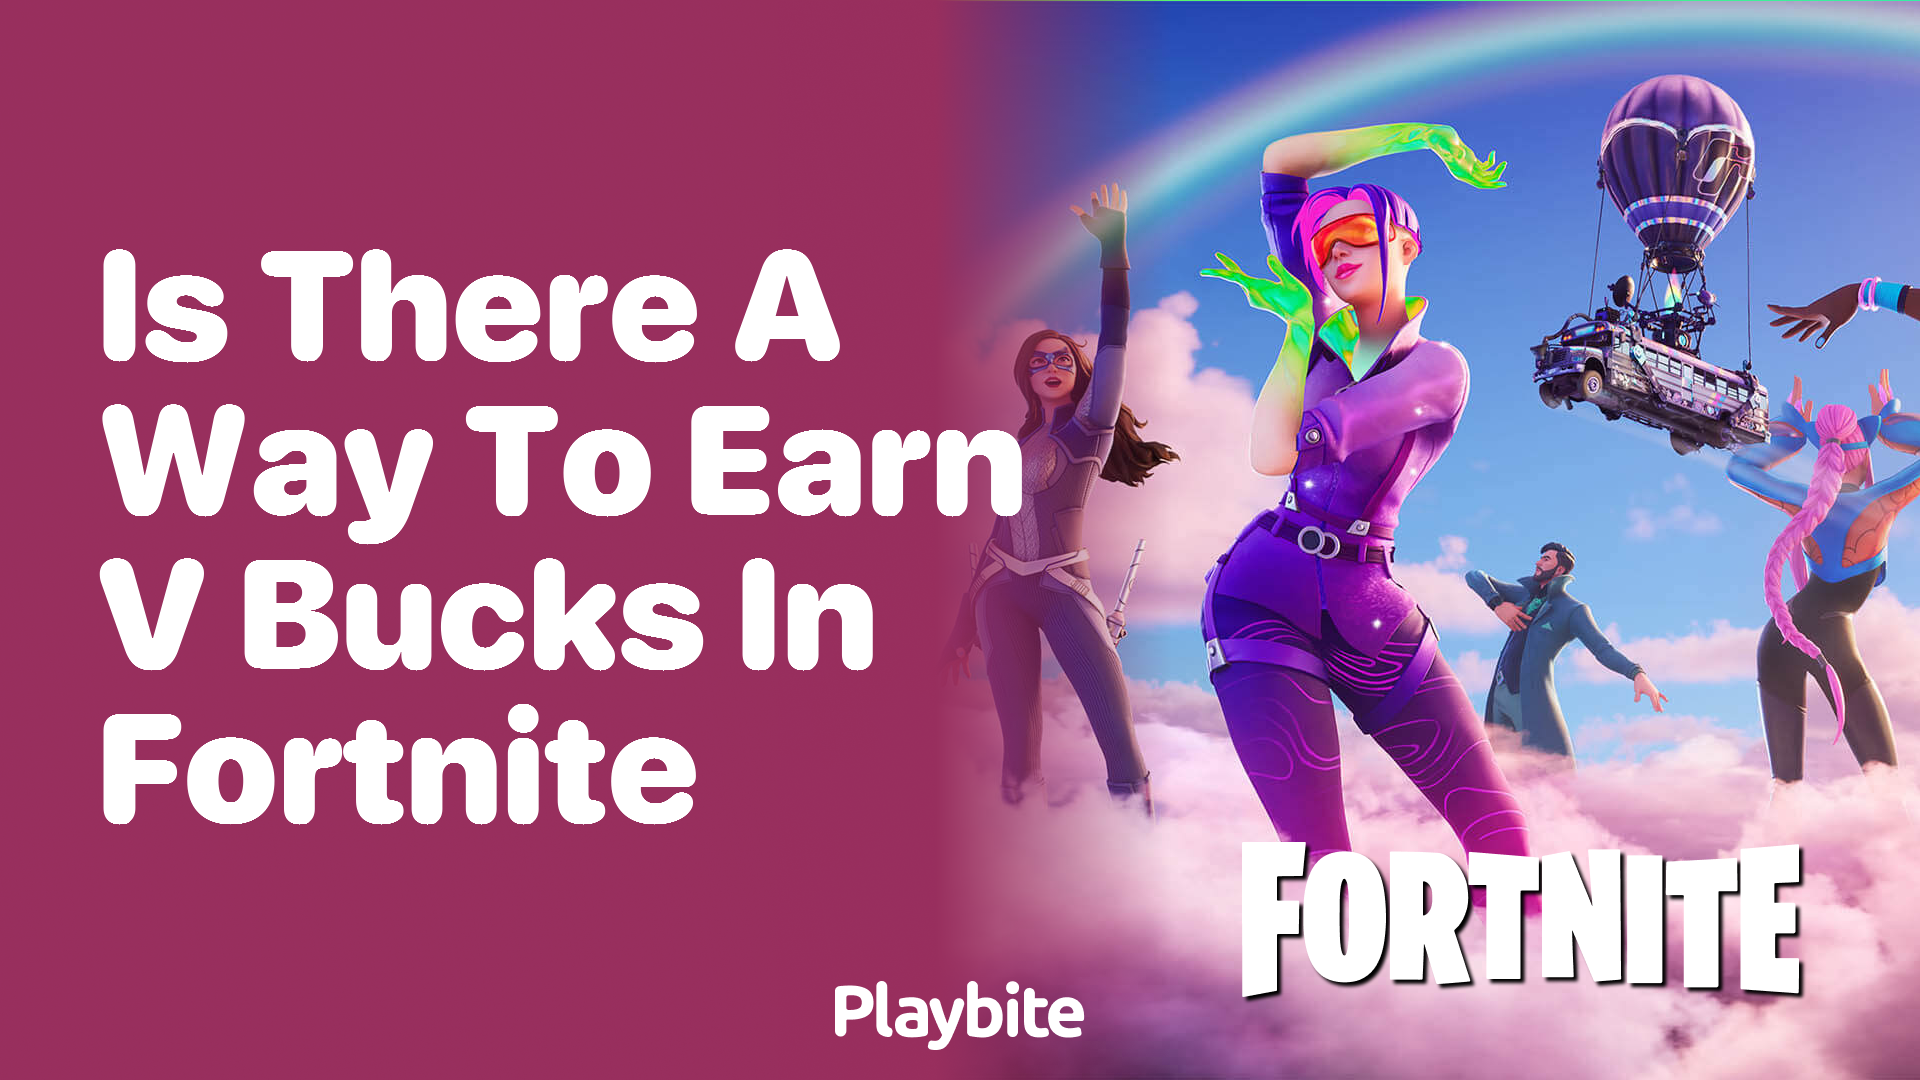 Is There a Way to Earn V-Bucks in Fortnite?